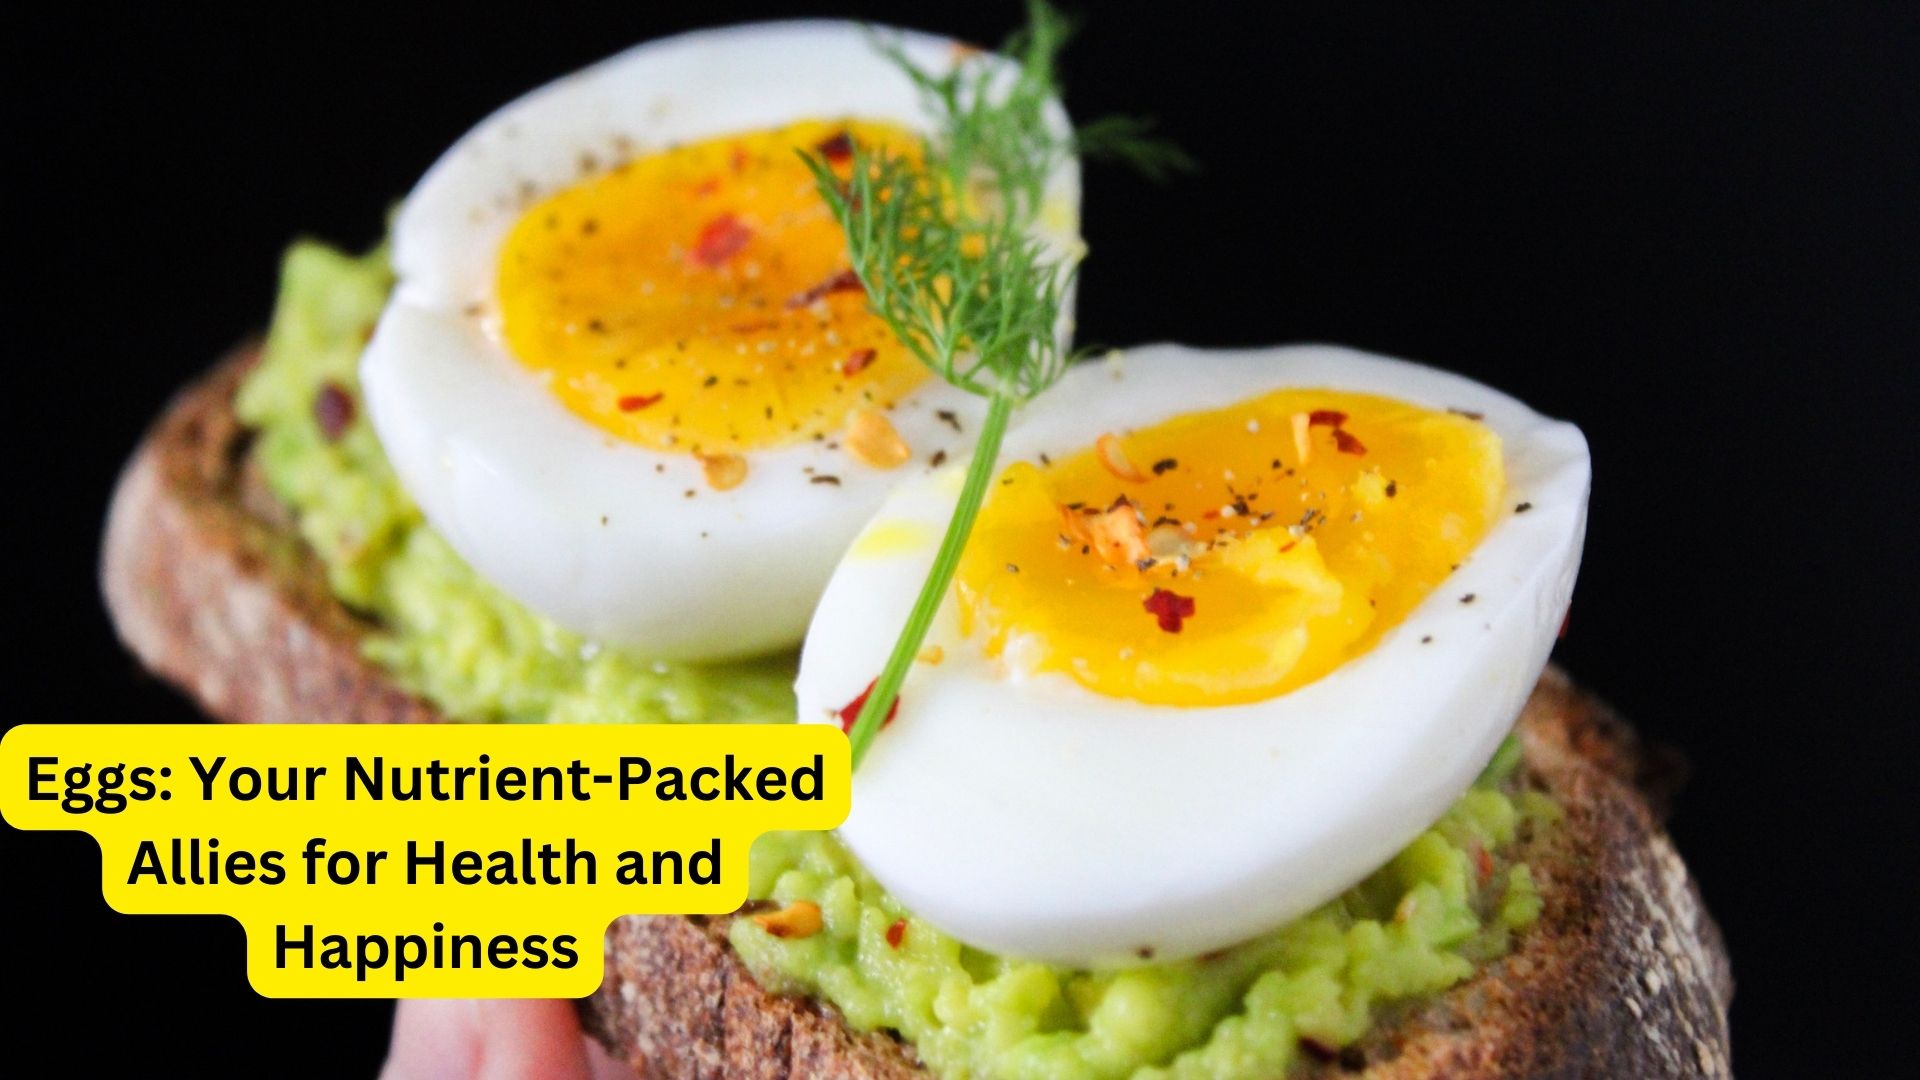 Eggs: Your Nutrient-Packed Allies for Health and Happiness